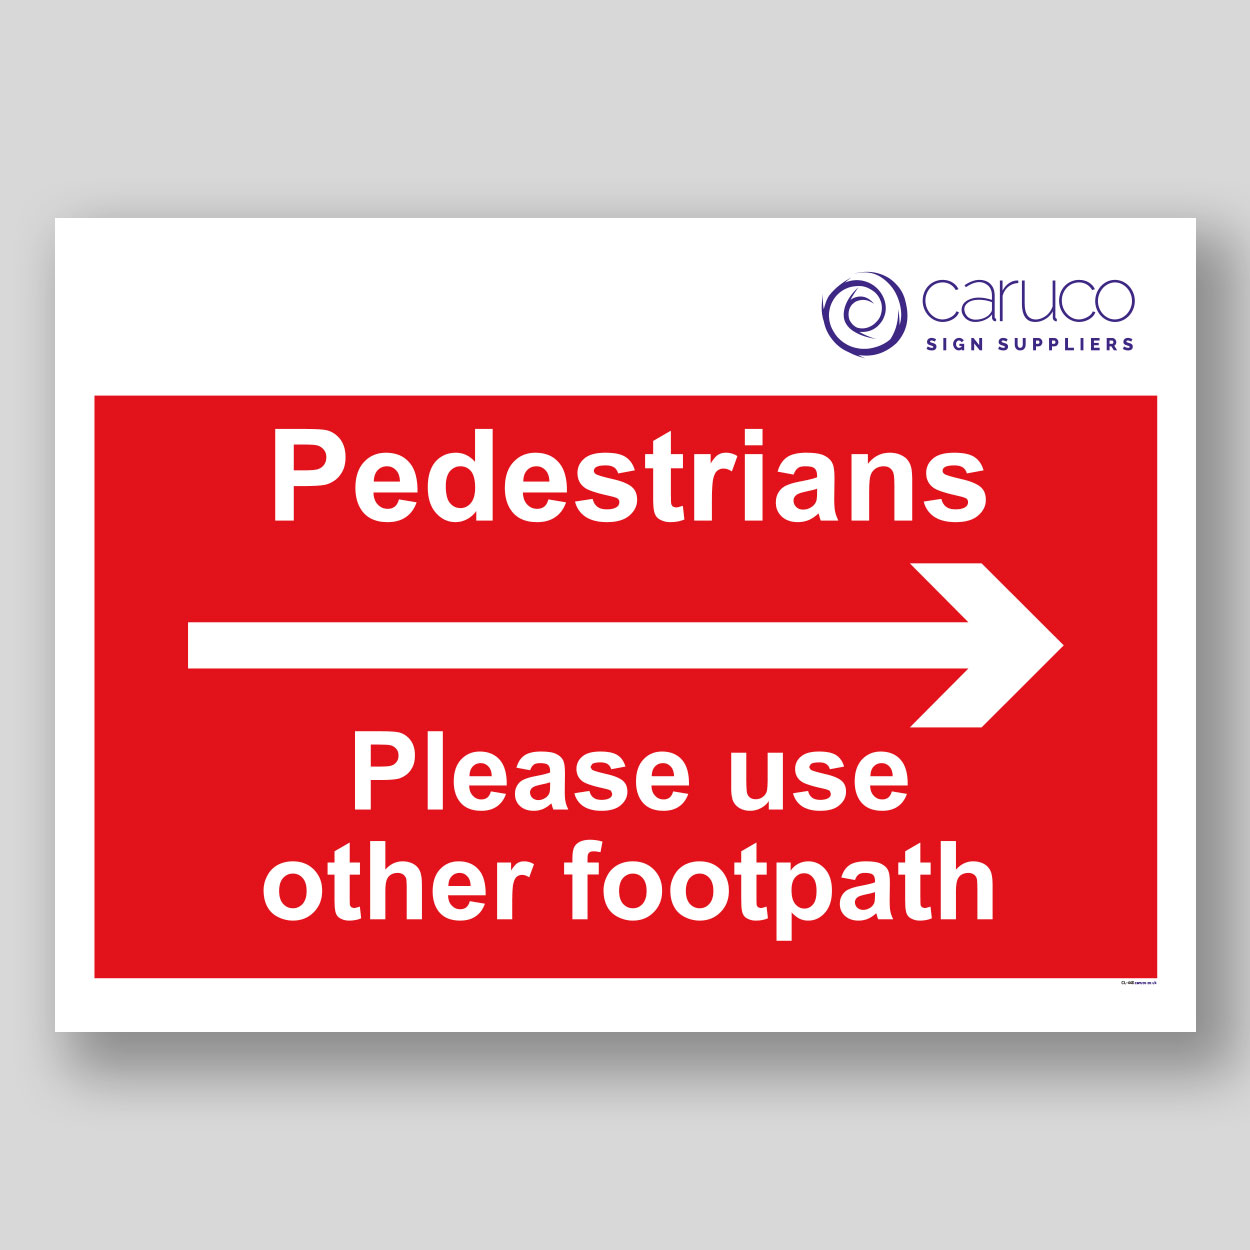 CL-440 Pedestrians use other footpath